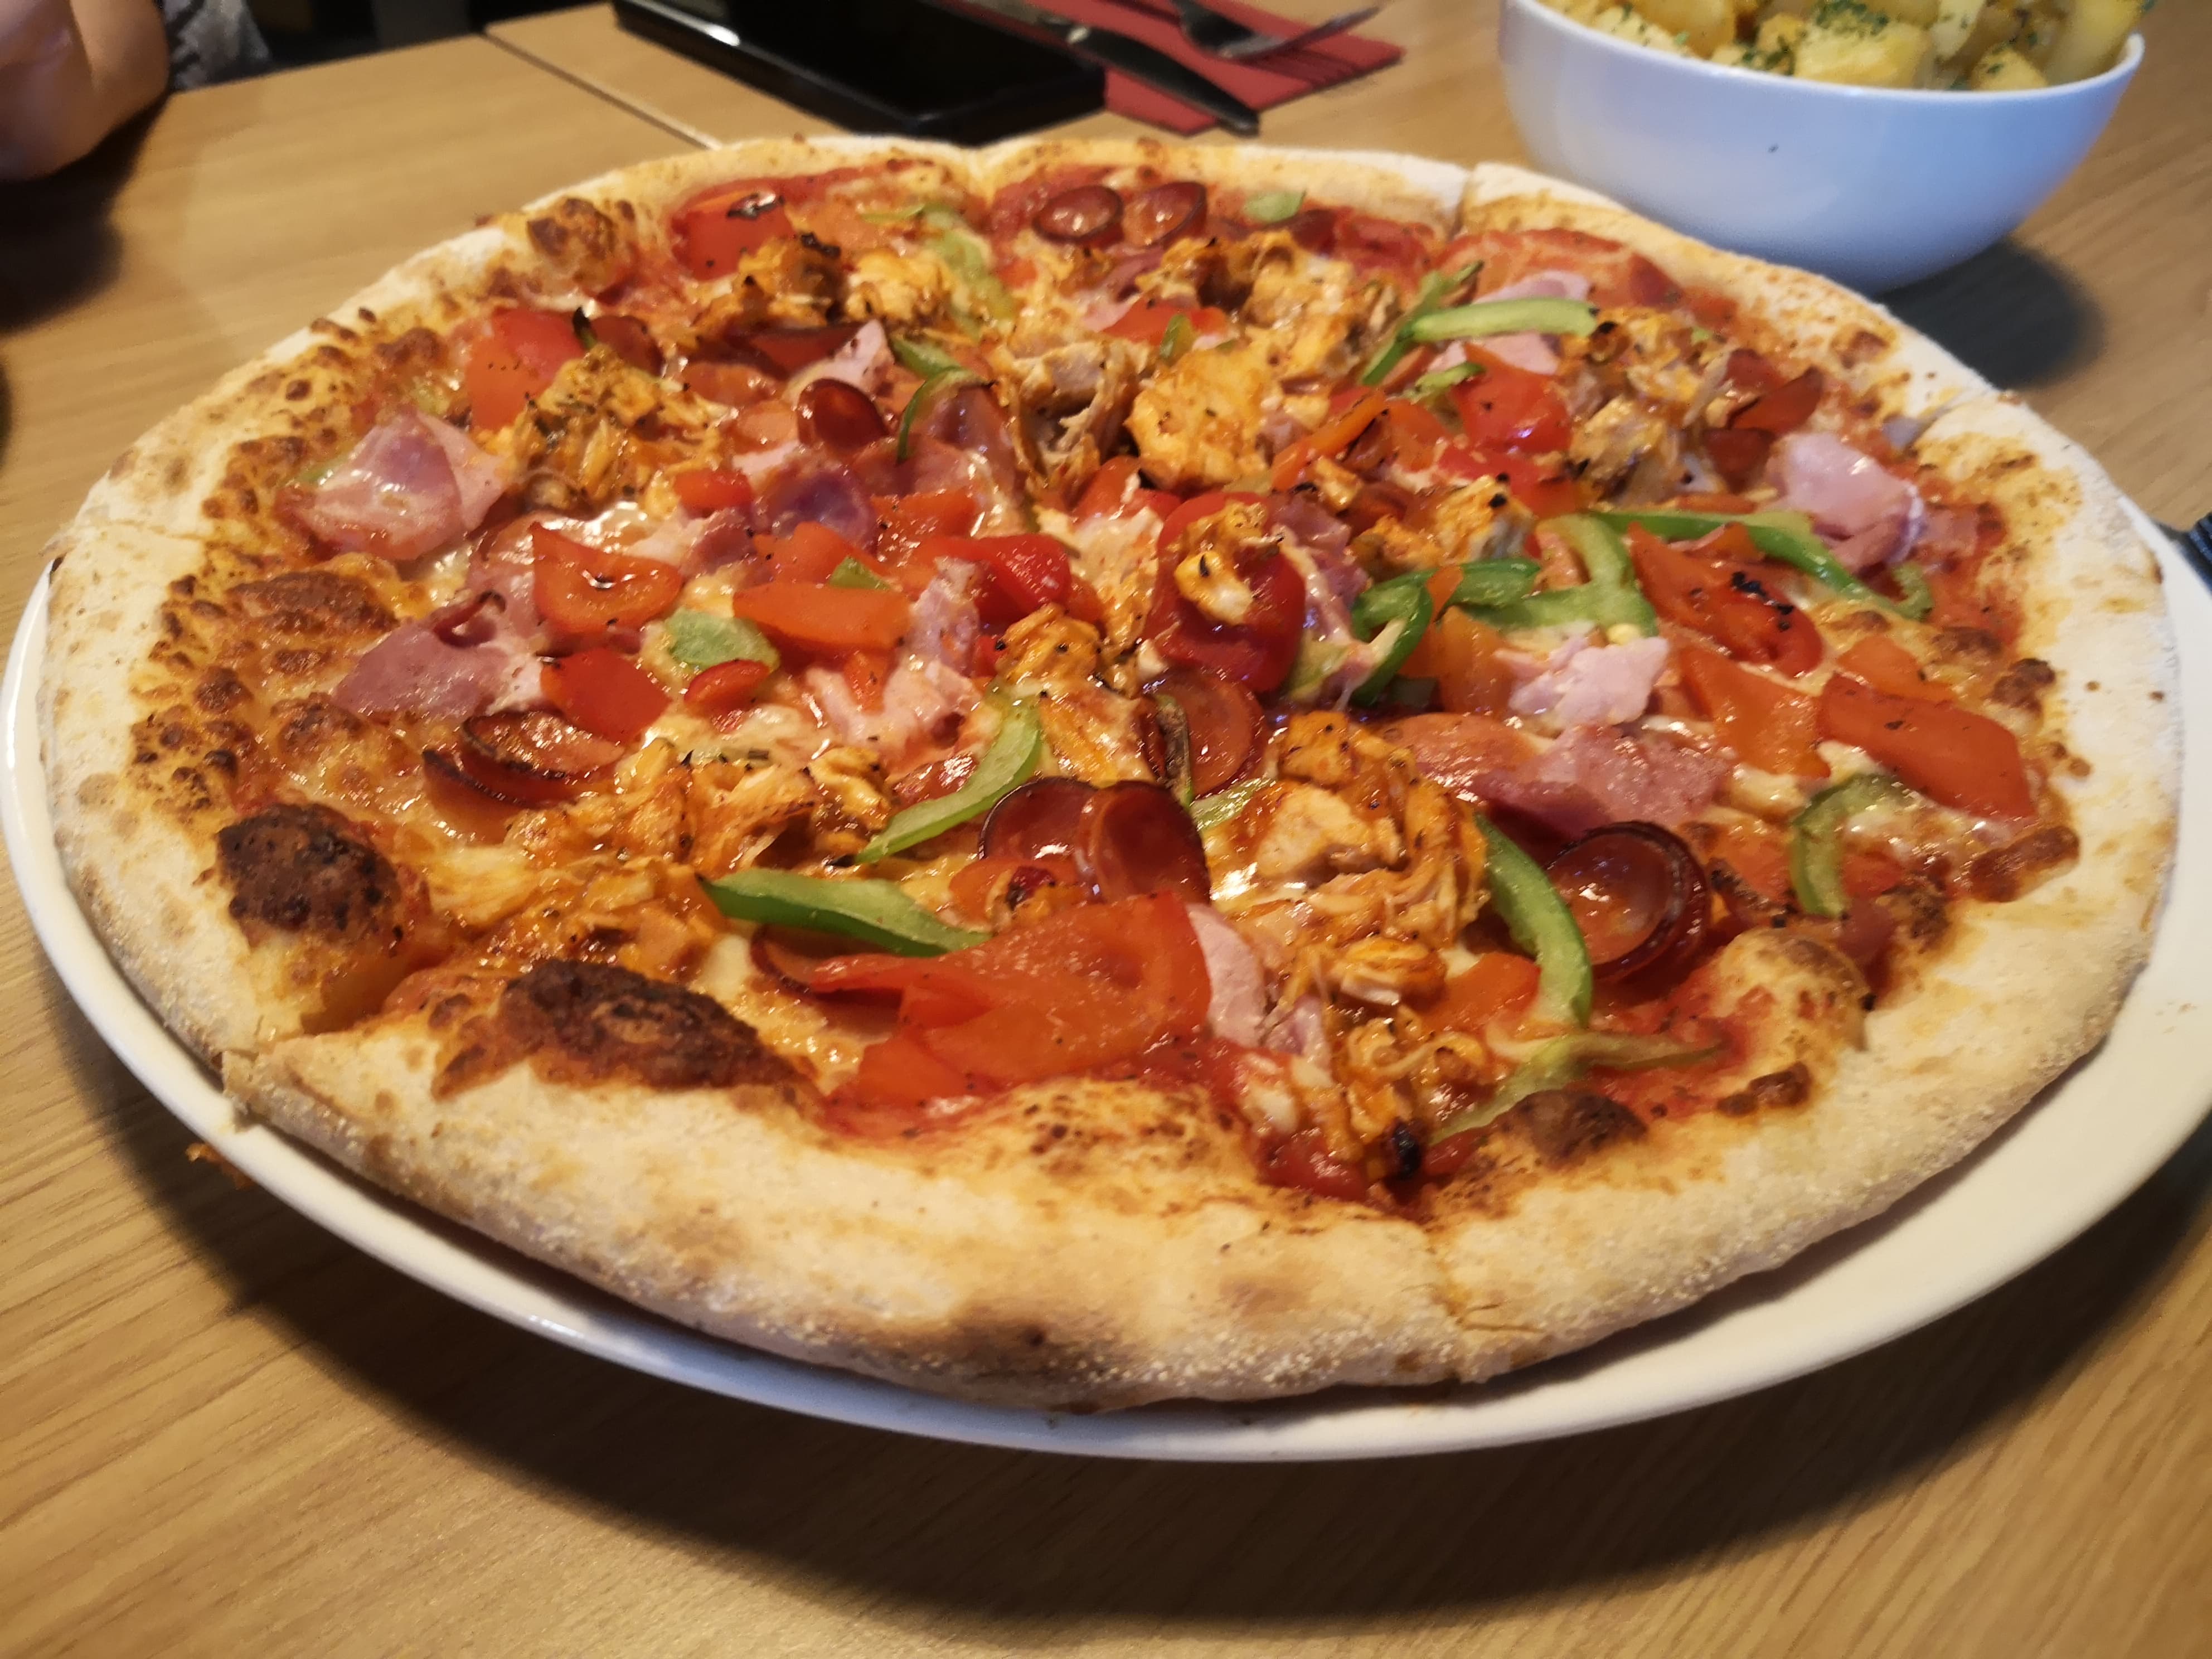 Little O’s pizza with peri peri chicken, bacon pepperoni and peppers